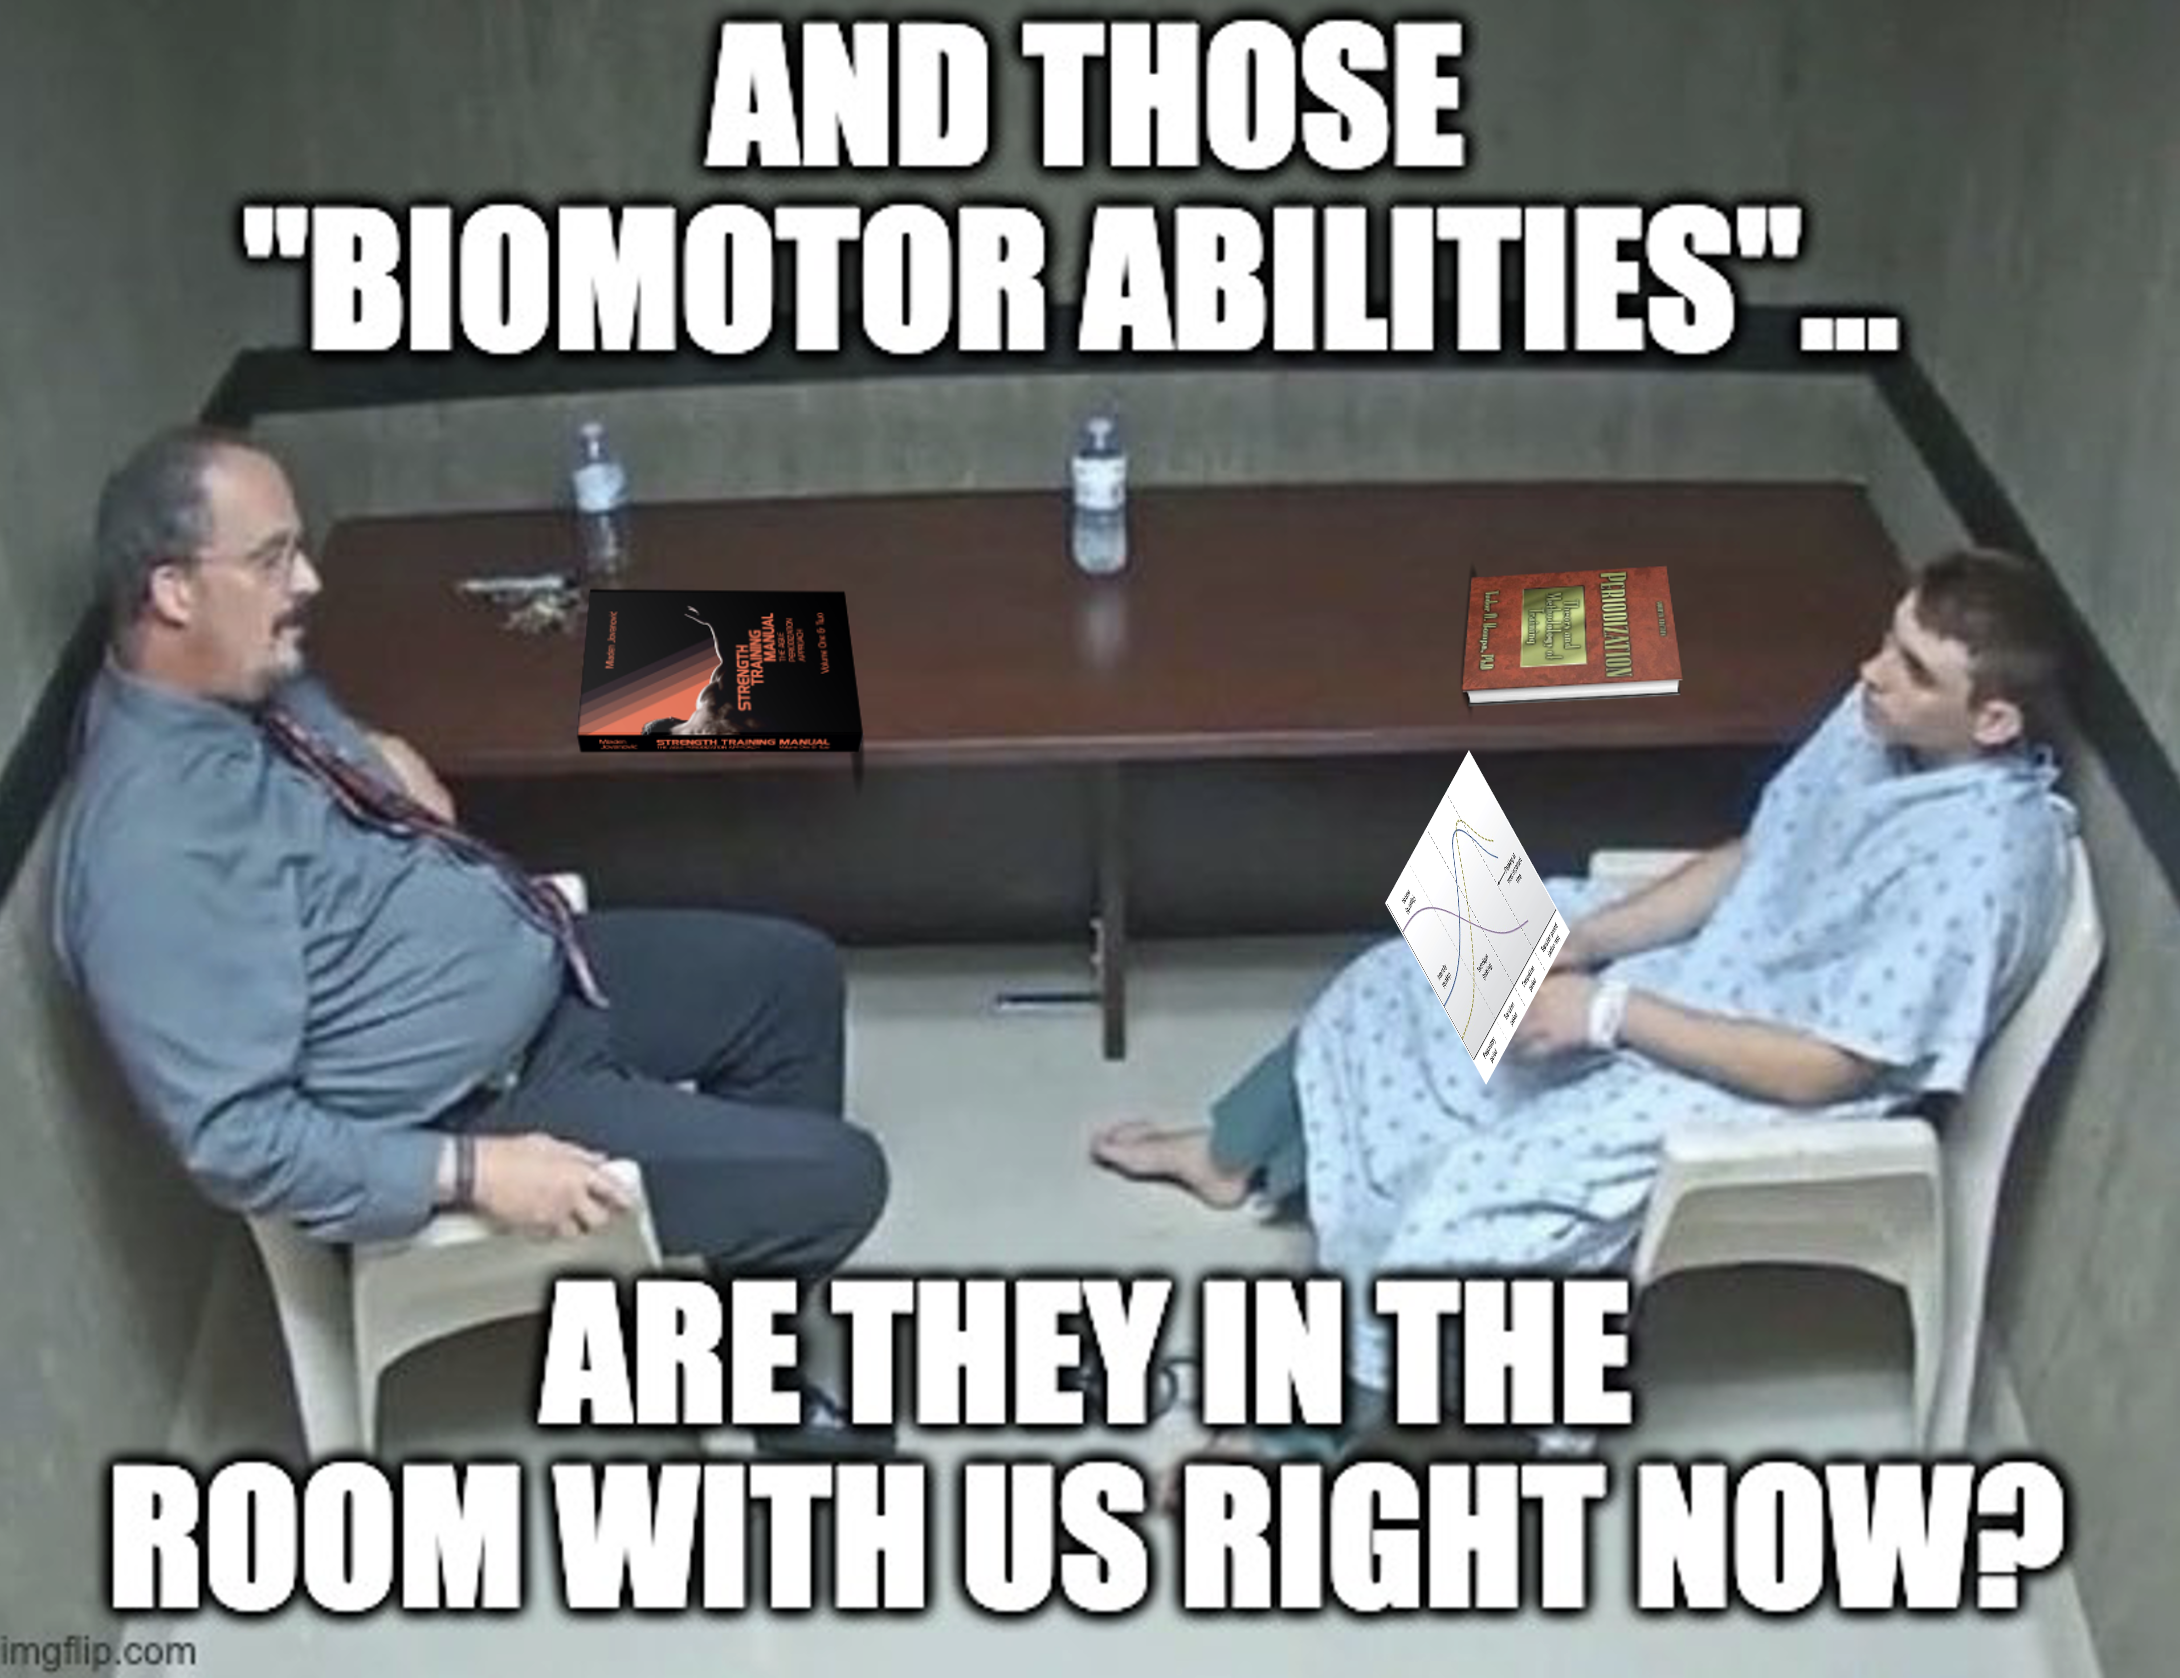 What the hell are the "biomotor abilities" anyway? And why do you need to "periodize" them?